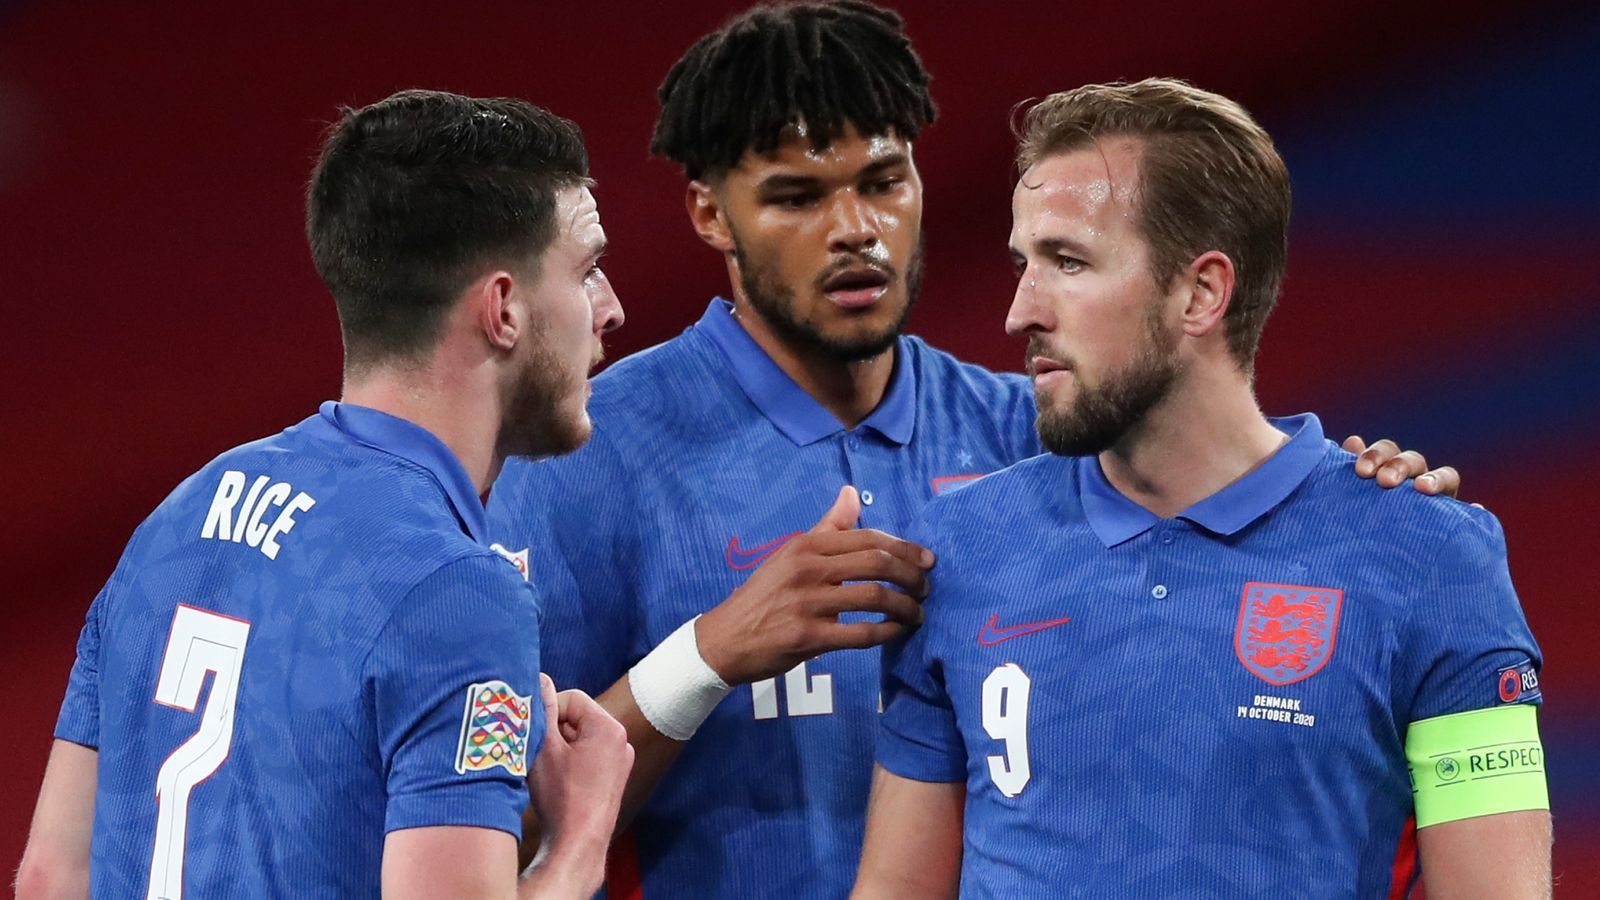 England Euro 2020 squad: Pick your XI for opening game against Croatia